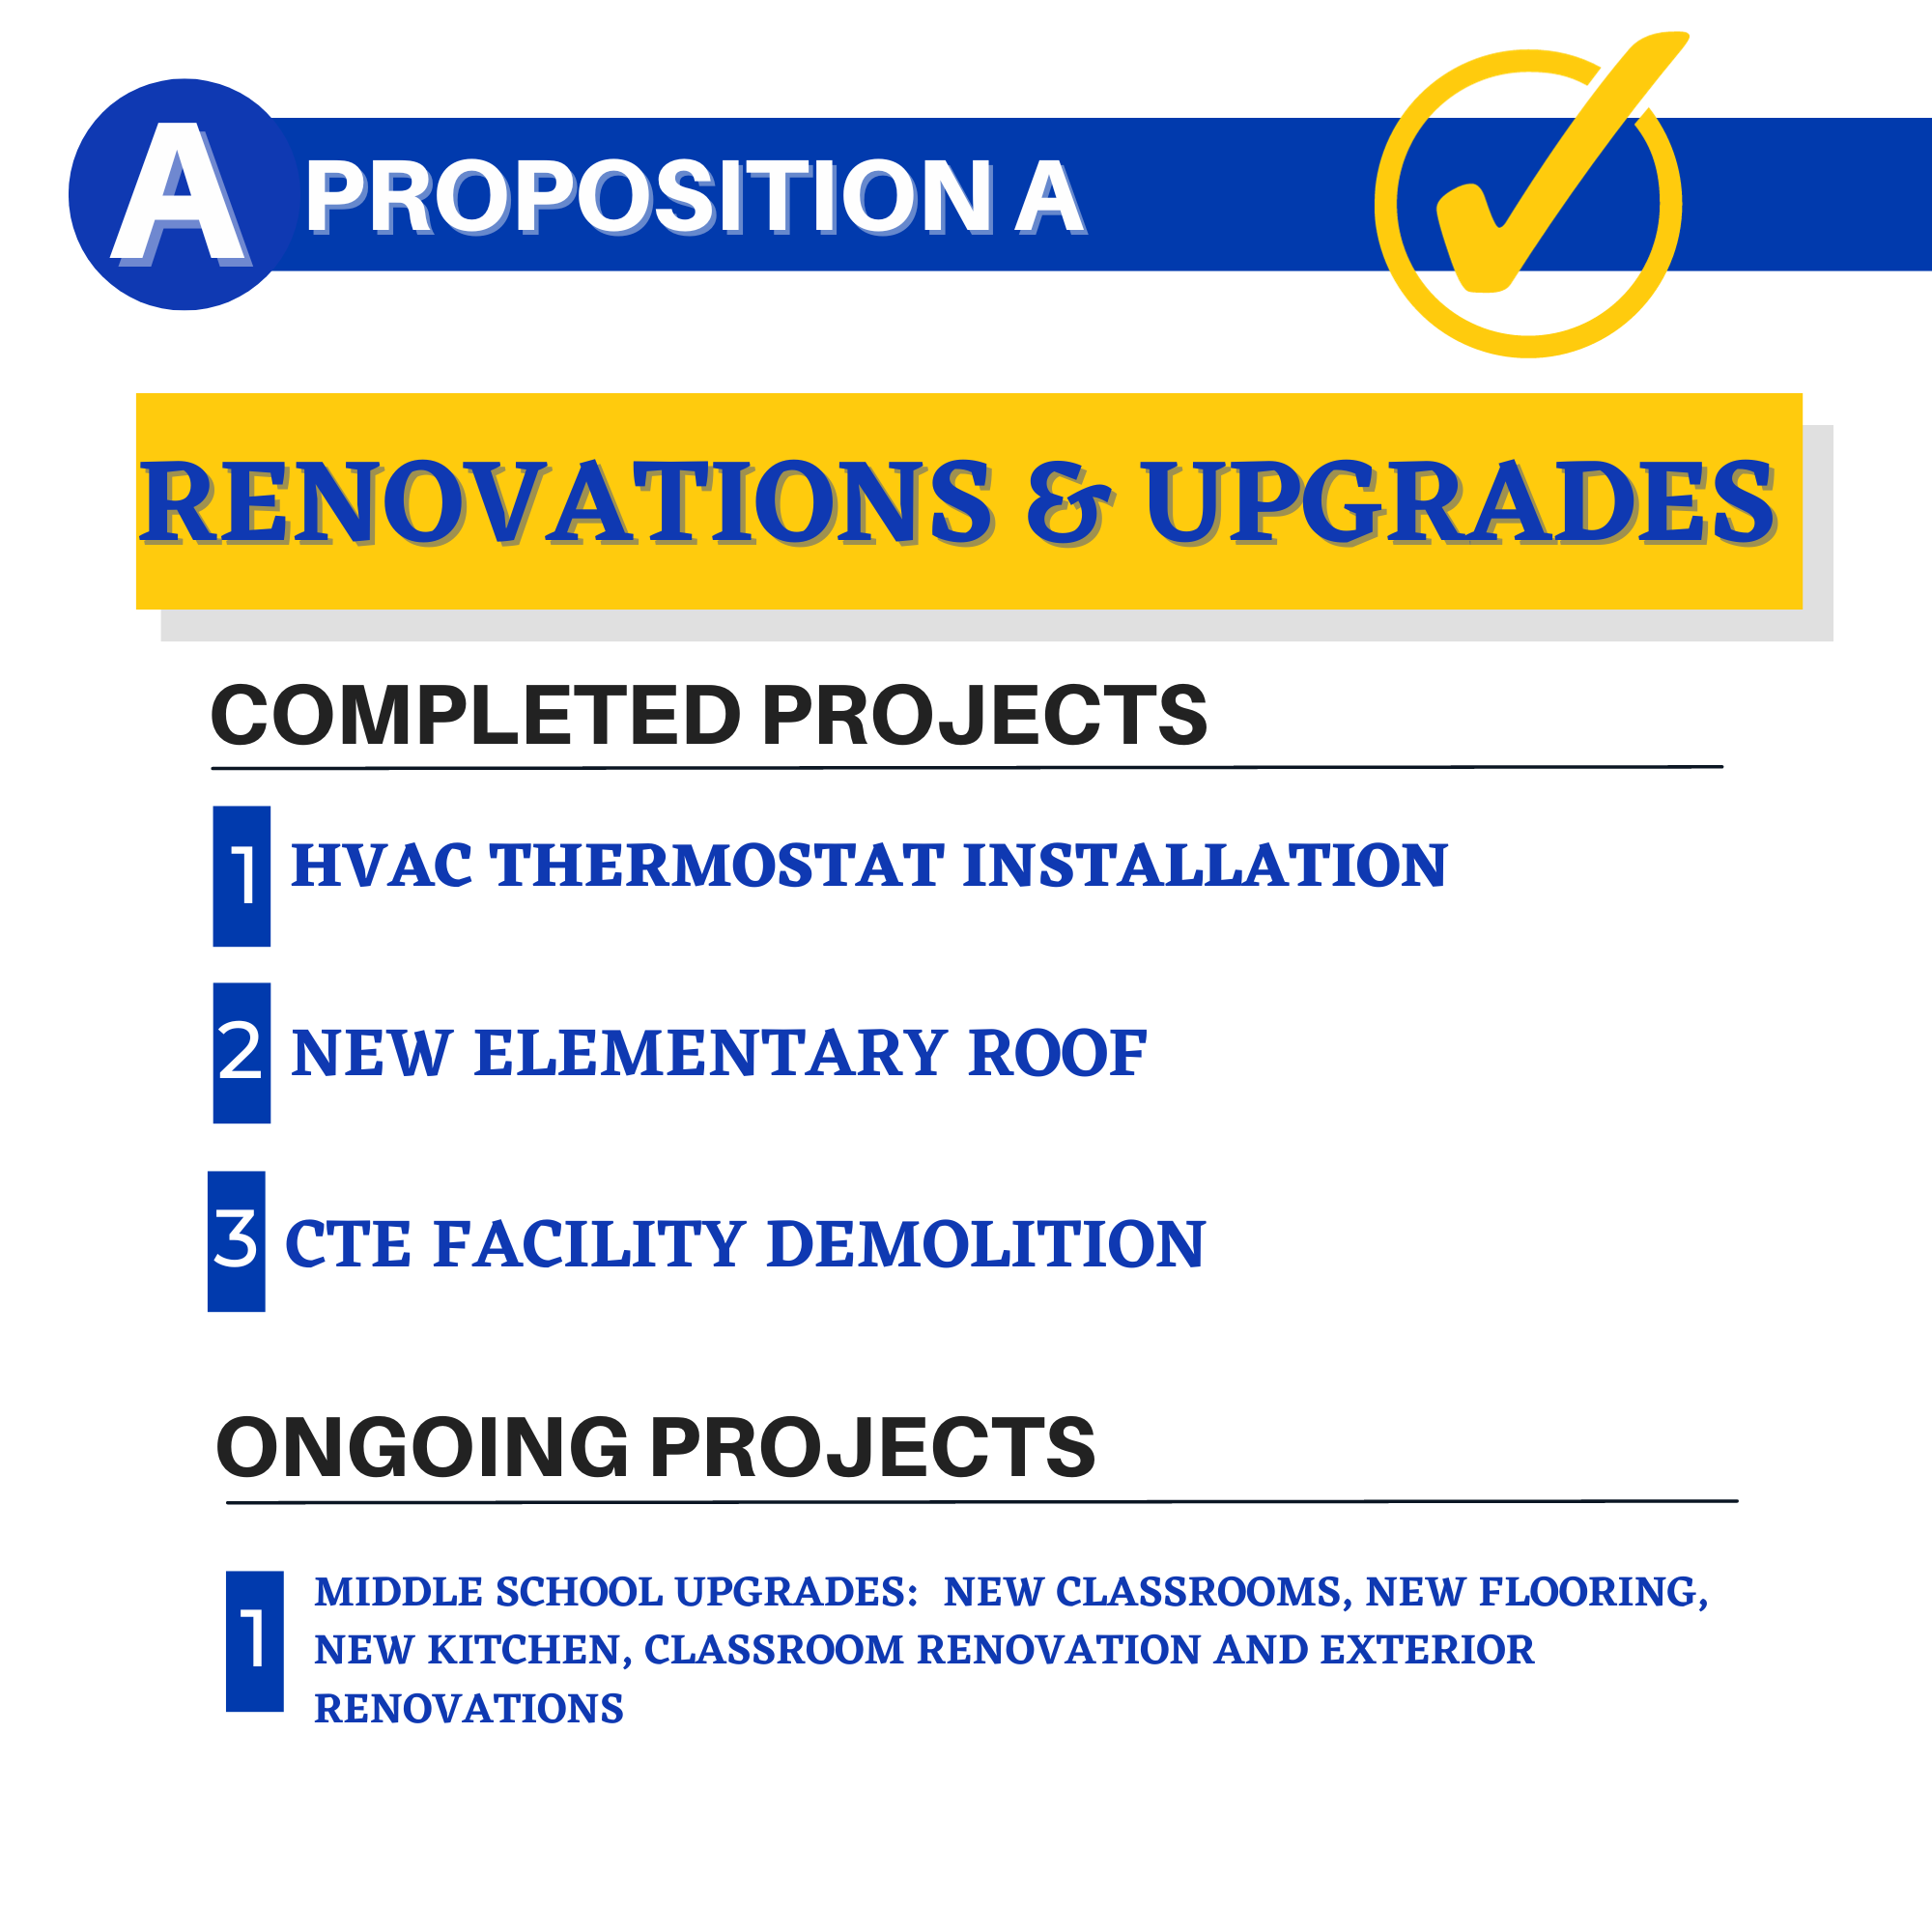 Proposition A, RENOVATIONS & uPGRADES, ONGOING PROJECTS,  HVAC THERMOSTAT INSTALLATION,  UPCOMING PROJECTS, MIDDLE SCHOOL UPGRADES: NEW CLASSROOMS, NEW FLOORING, NEW KITCHEN, CLASSROOM RENOVATIONS AND EXTERIOR RENOVATIONS,  ELEMENTARY ROOF